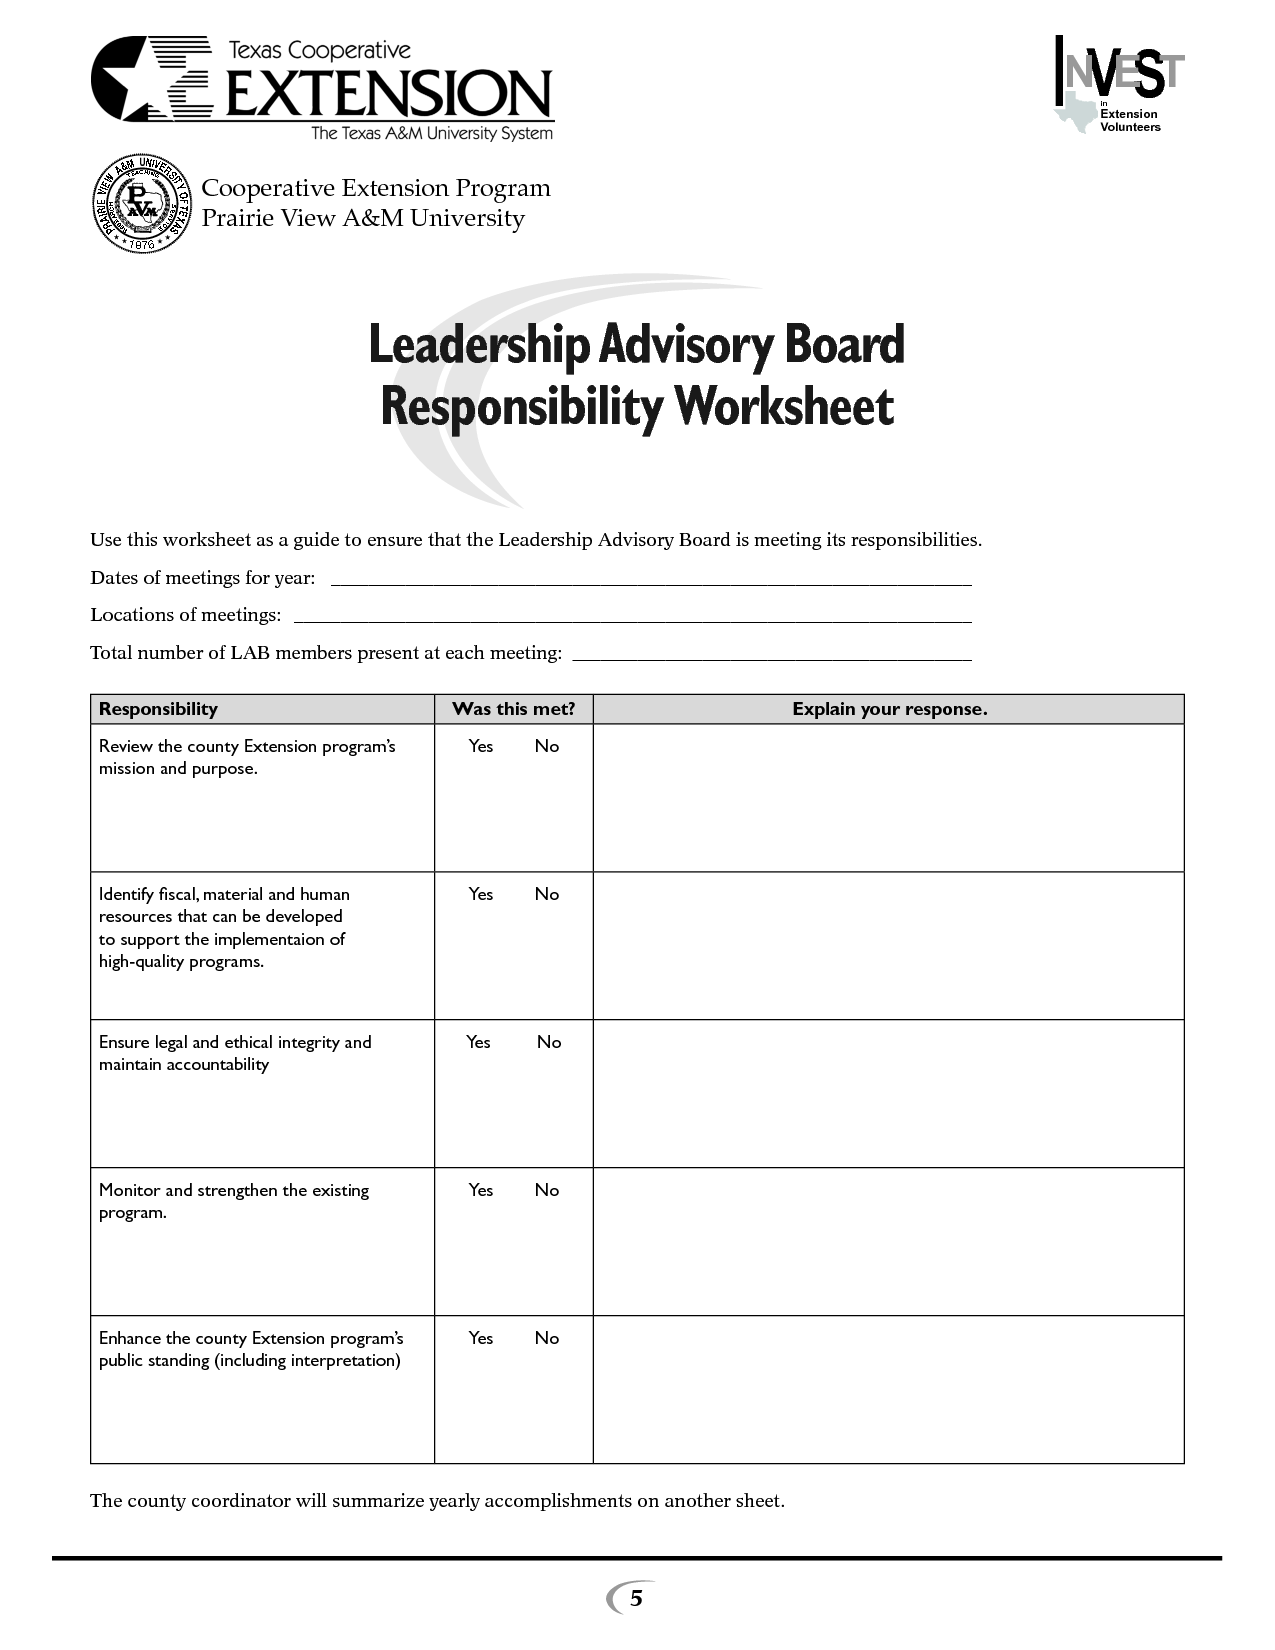 11-accepting-personal-responsibility-worksheets-worksheeto